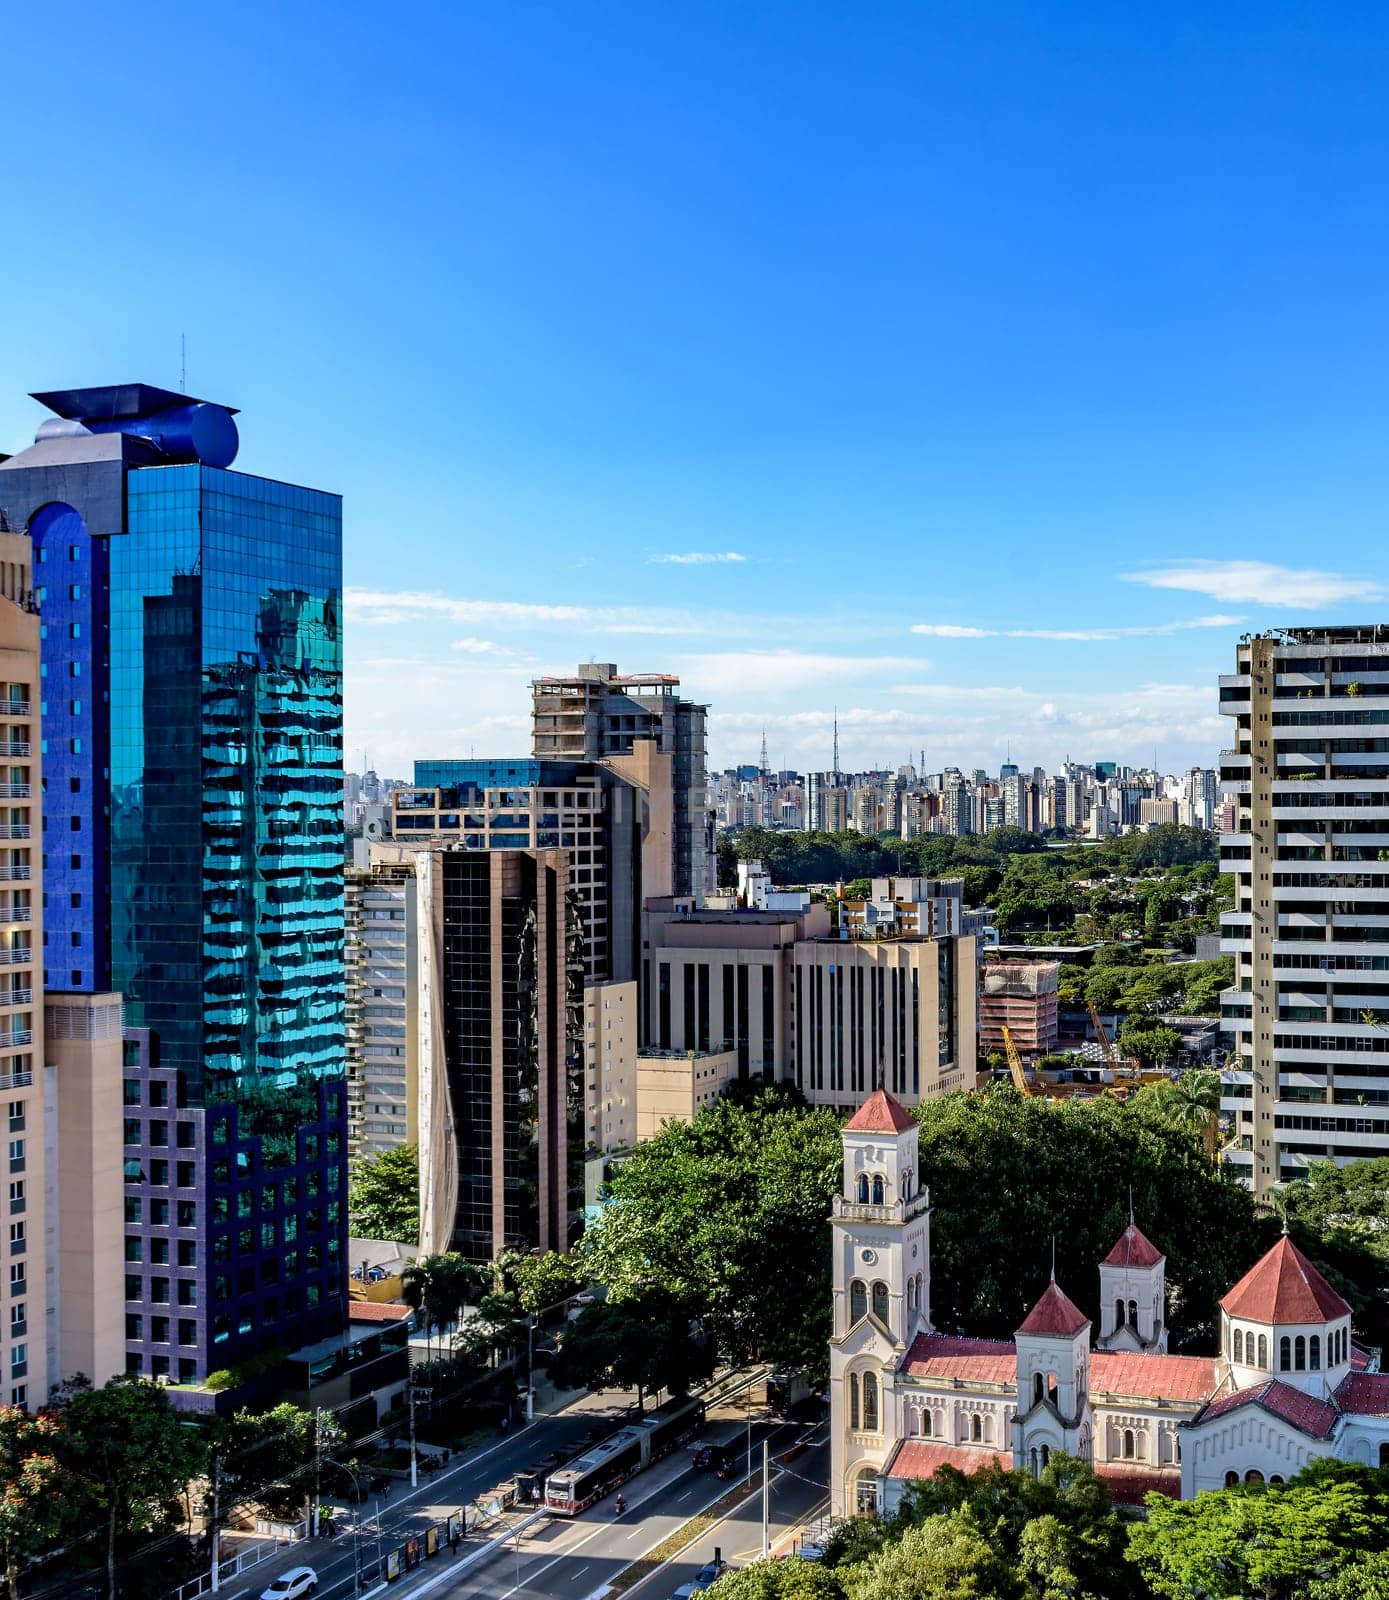 View of the modern city of São Paulo and its buildings forming a wall of buildings in the background on a sunny day